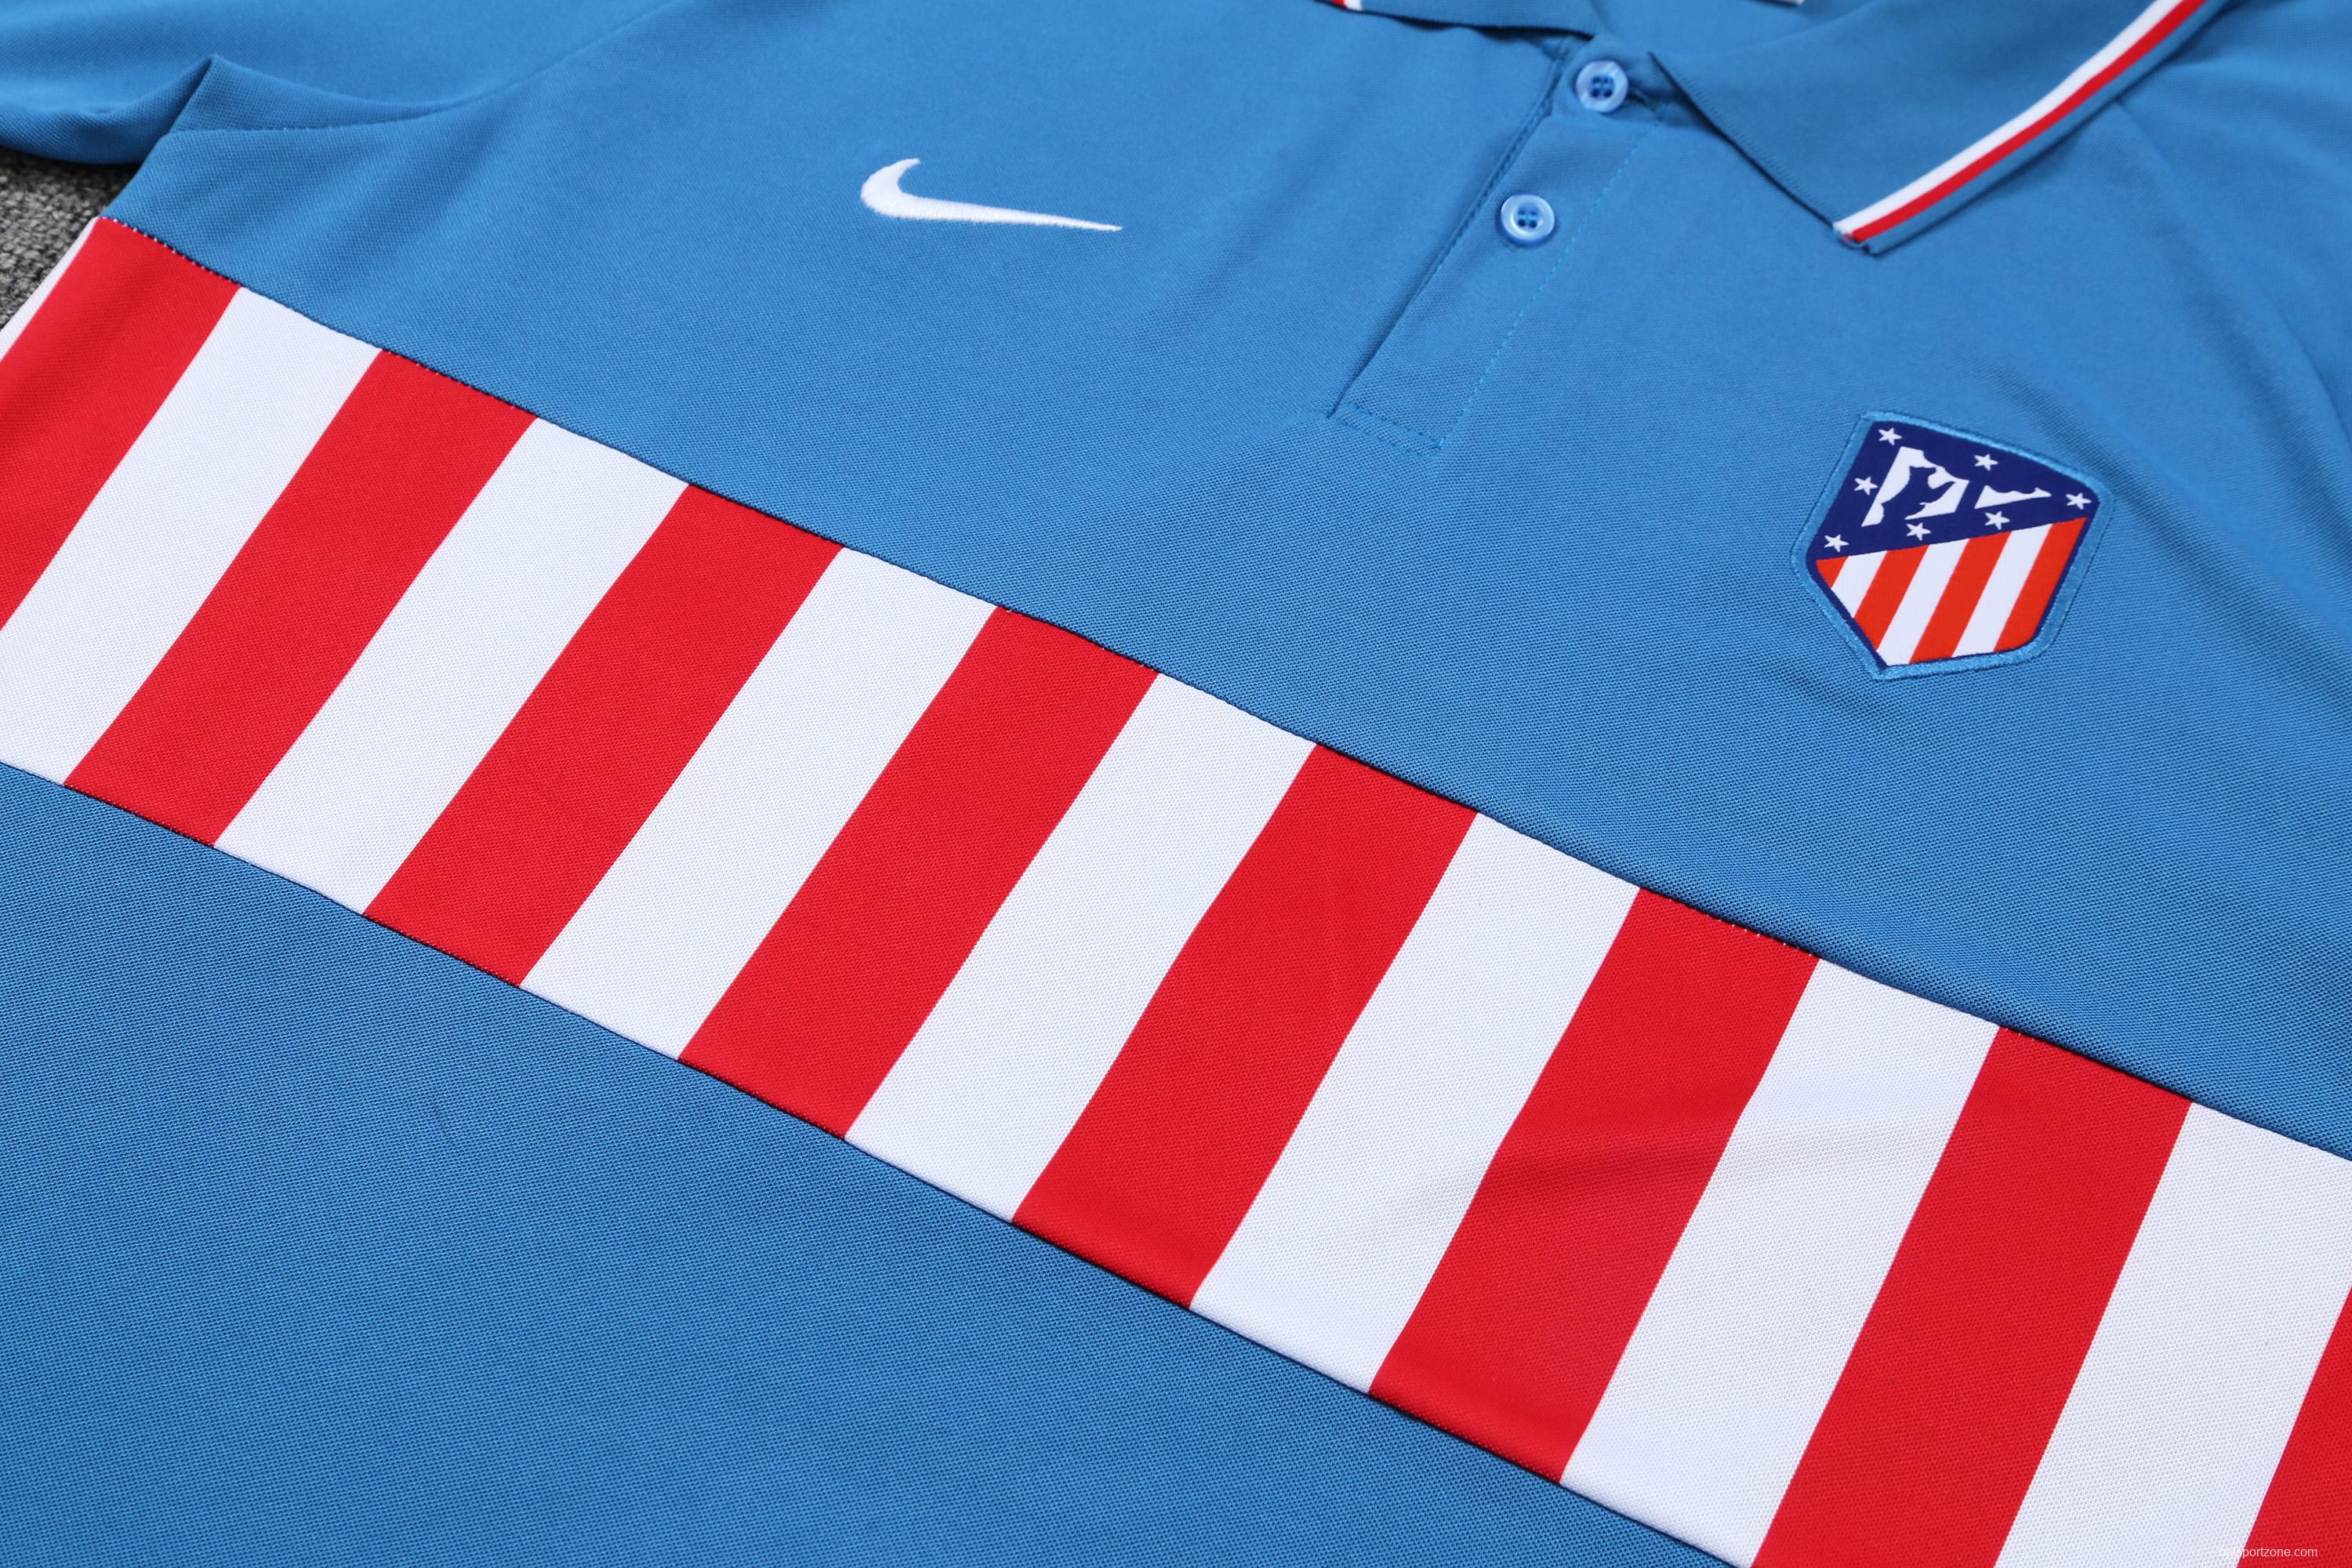 Atletico Madrid POLO kit Blue red and white stripes (not supported to be sold separately)